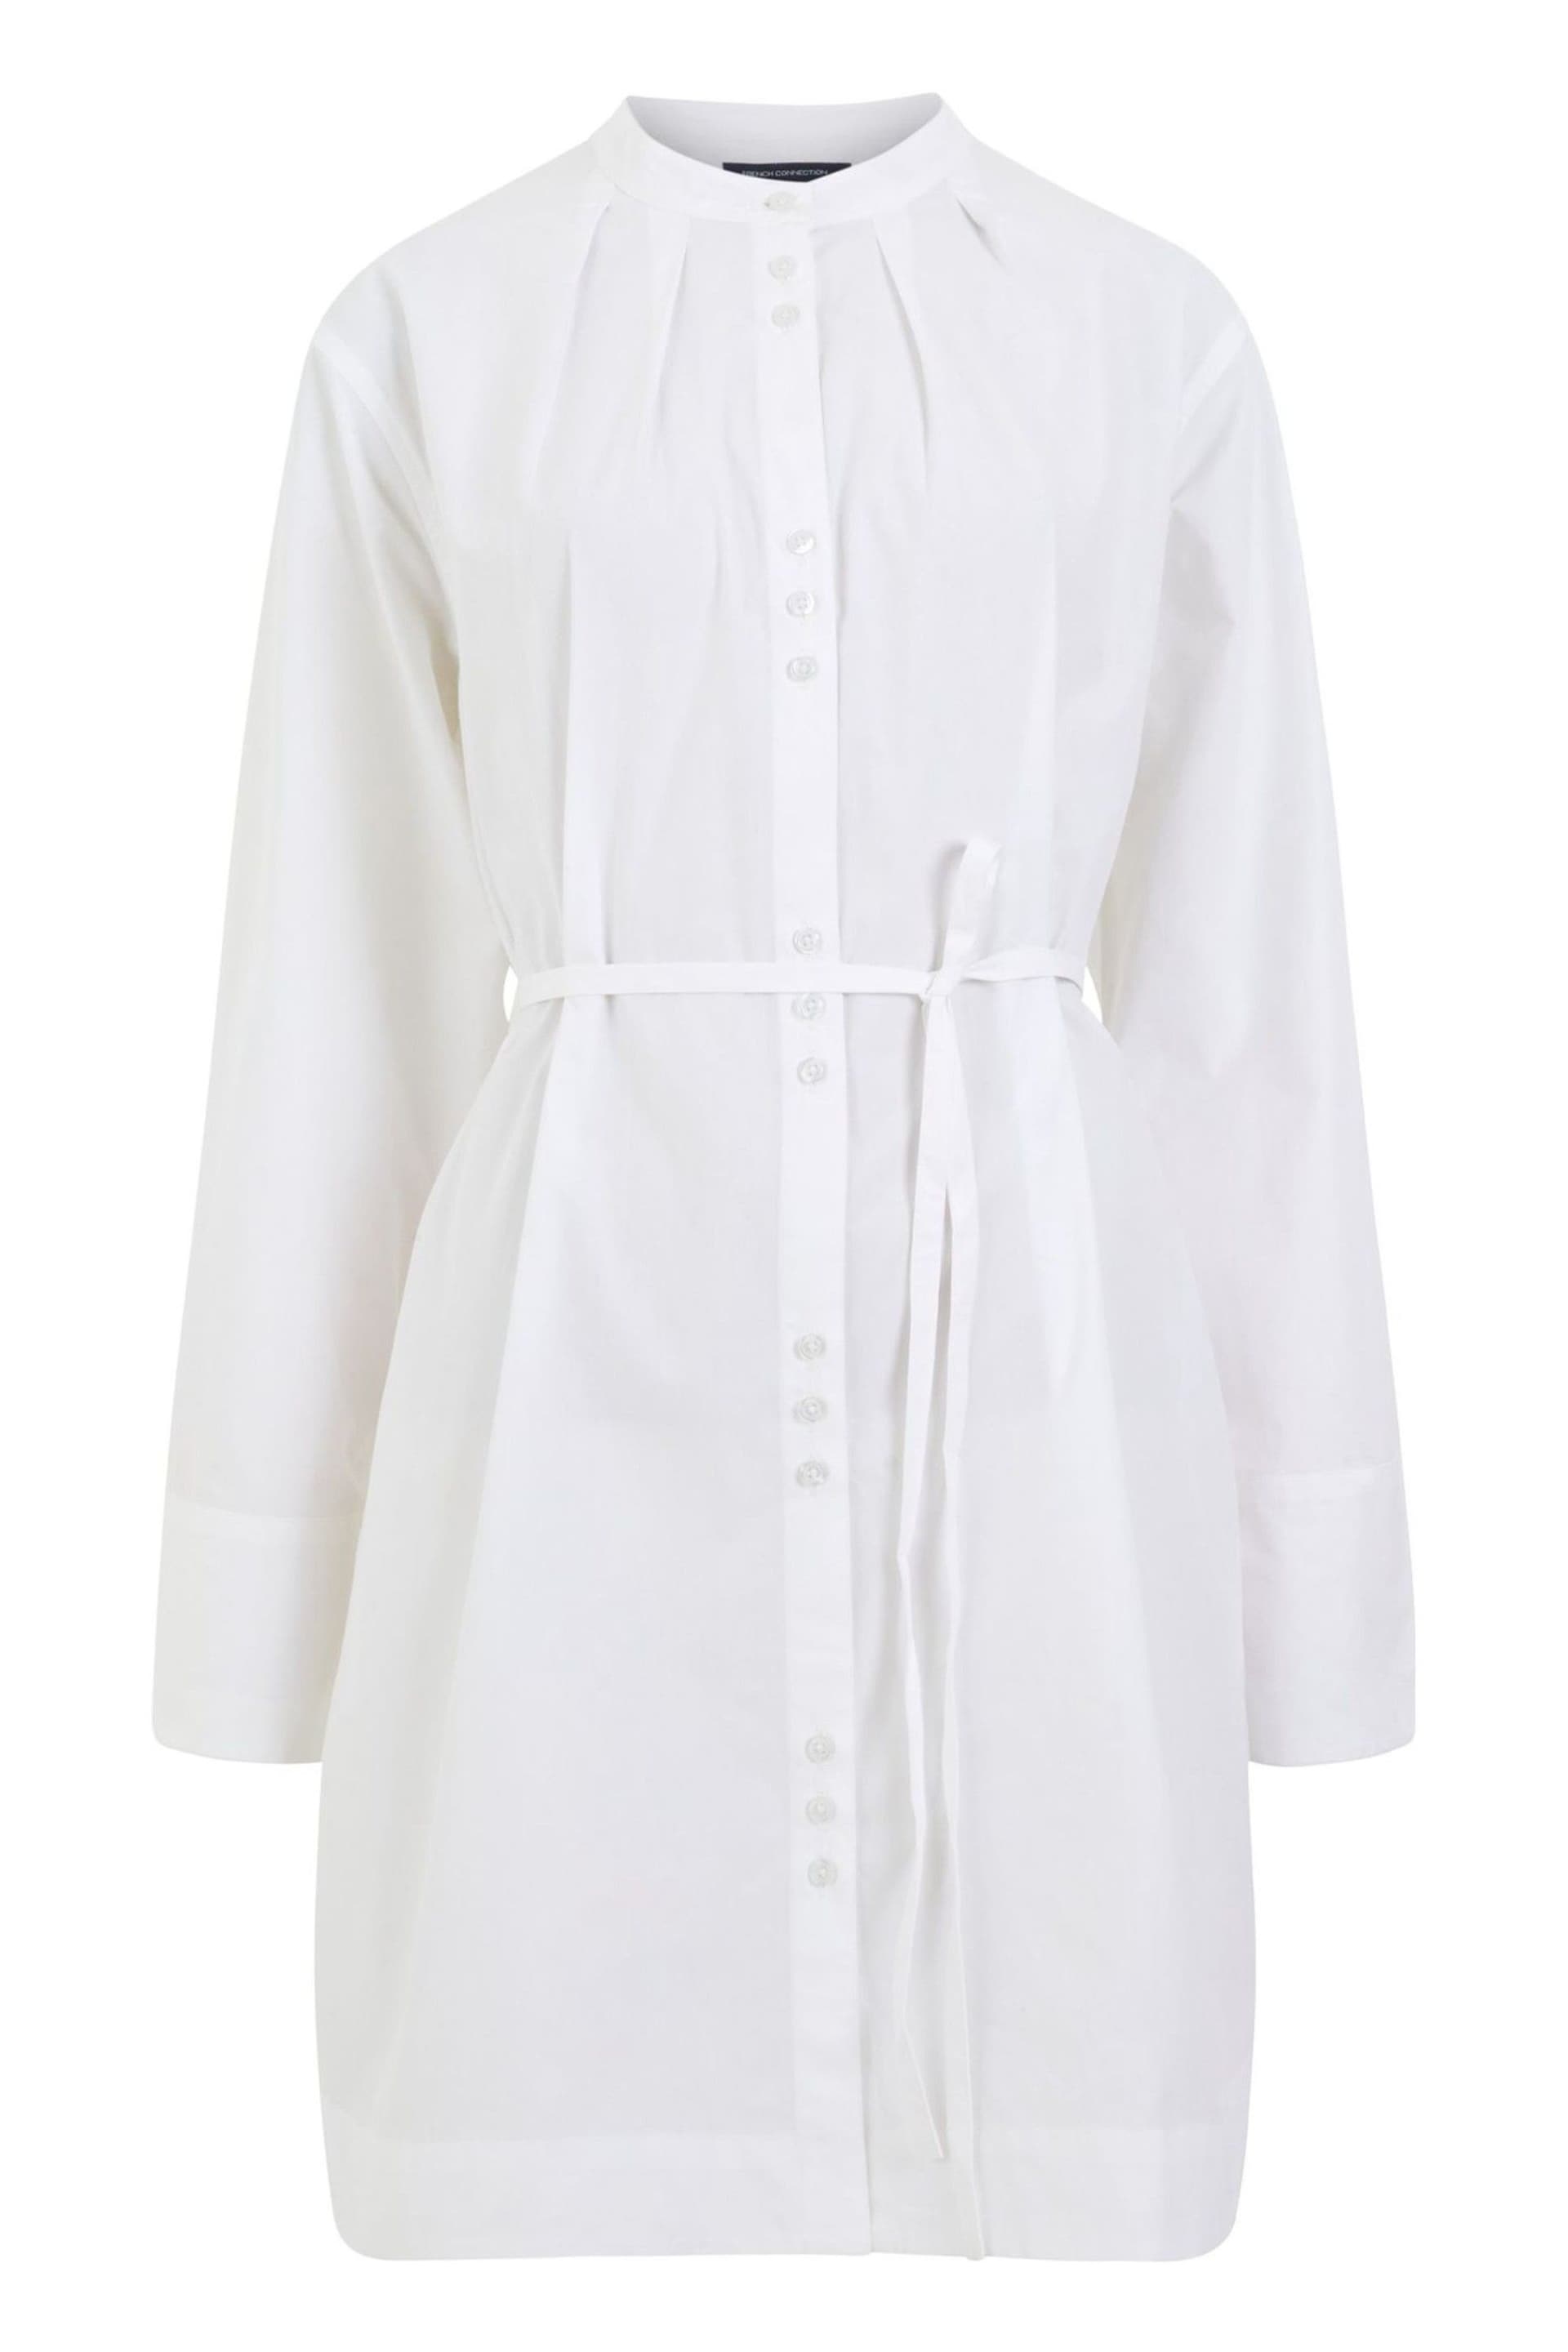 French Connection Alissa Cot Wide Sleeve Shirt Dress - Image 4 of 4